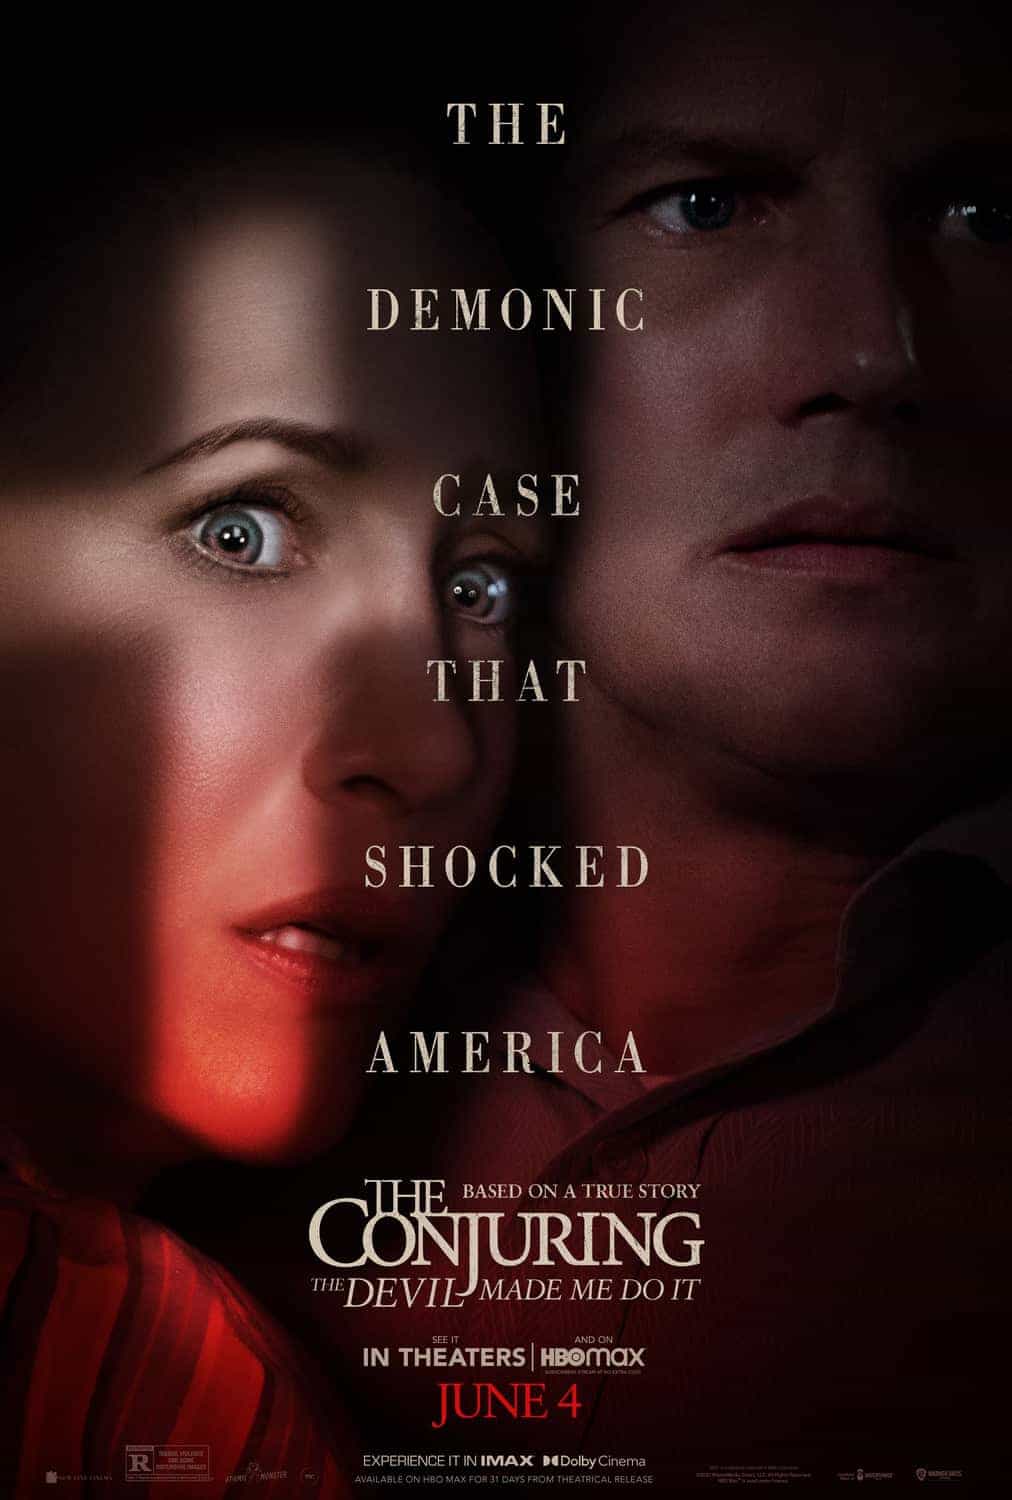 The Conjuring: The Devil Made Me Do It is given a 15 age rating in the UK for strong threat, horror, violence